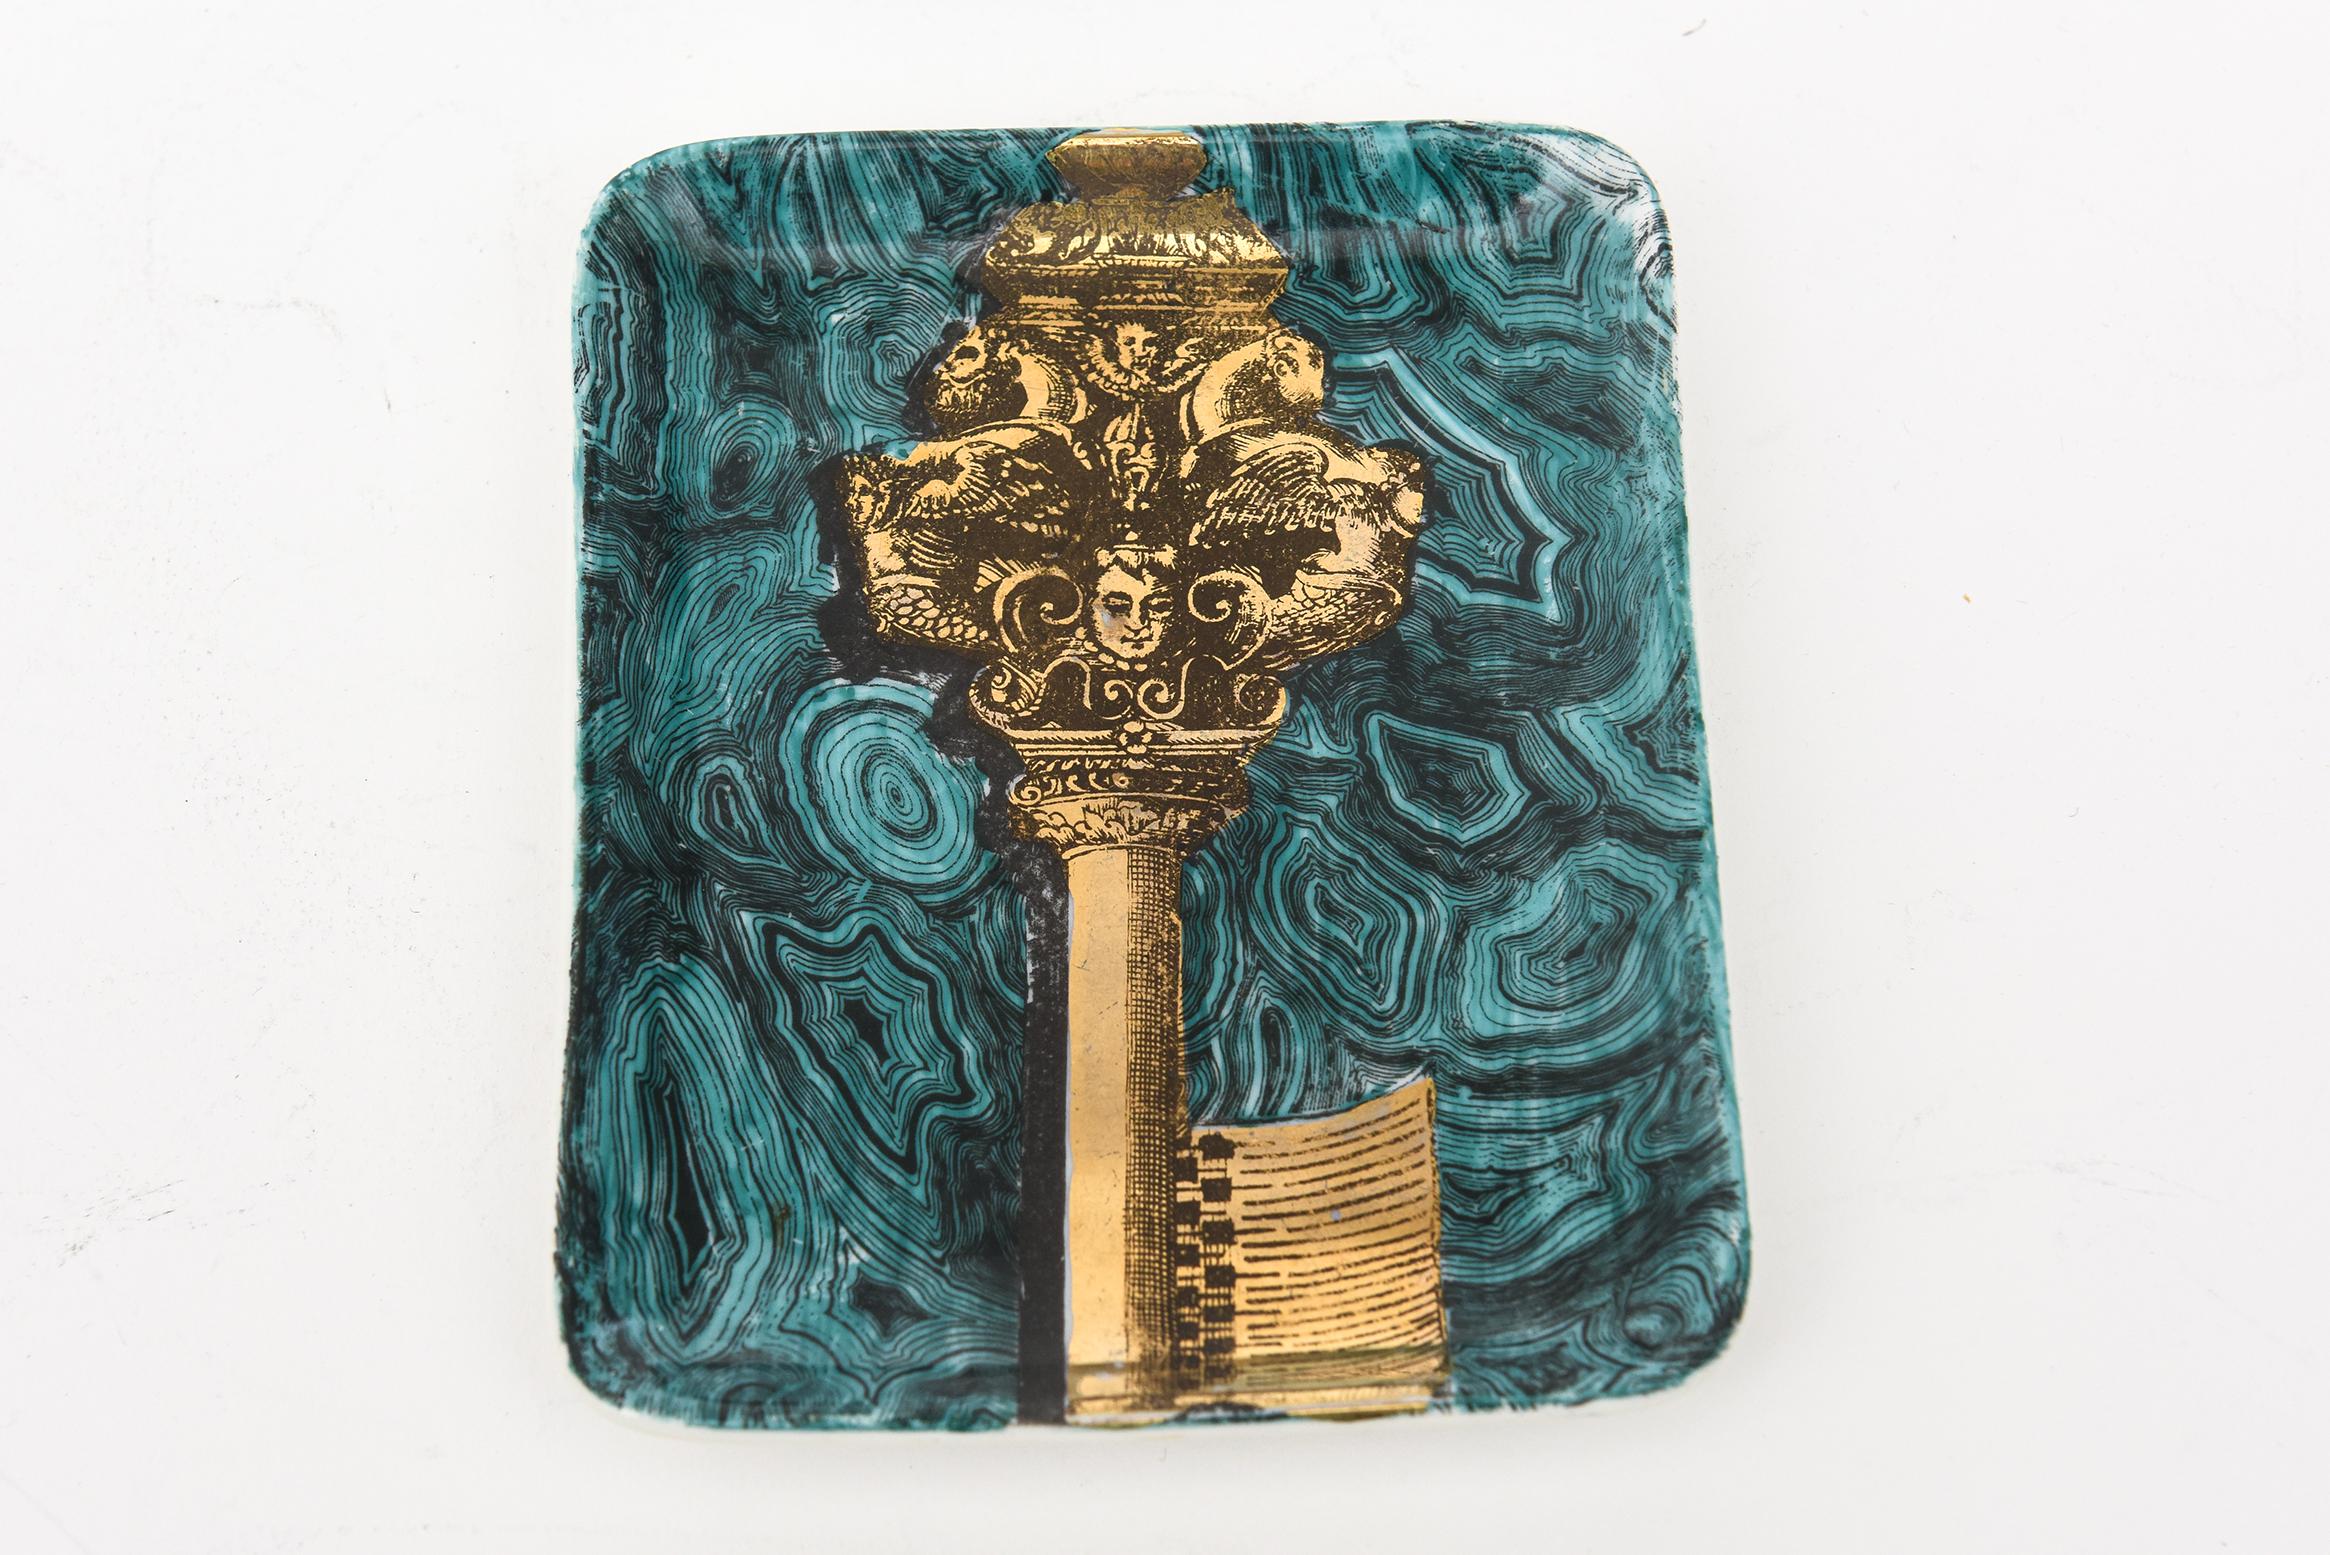 This unusual vintage Piero Fornasetti small porcelain tray or dish has the motif and subject matter of a gilded key amongst swirls of faux teal green turquoise malachite. This is a great ring or small tray and from the 50's. Signed and hallmarked